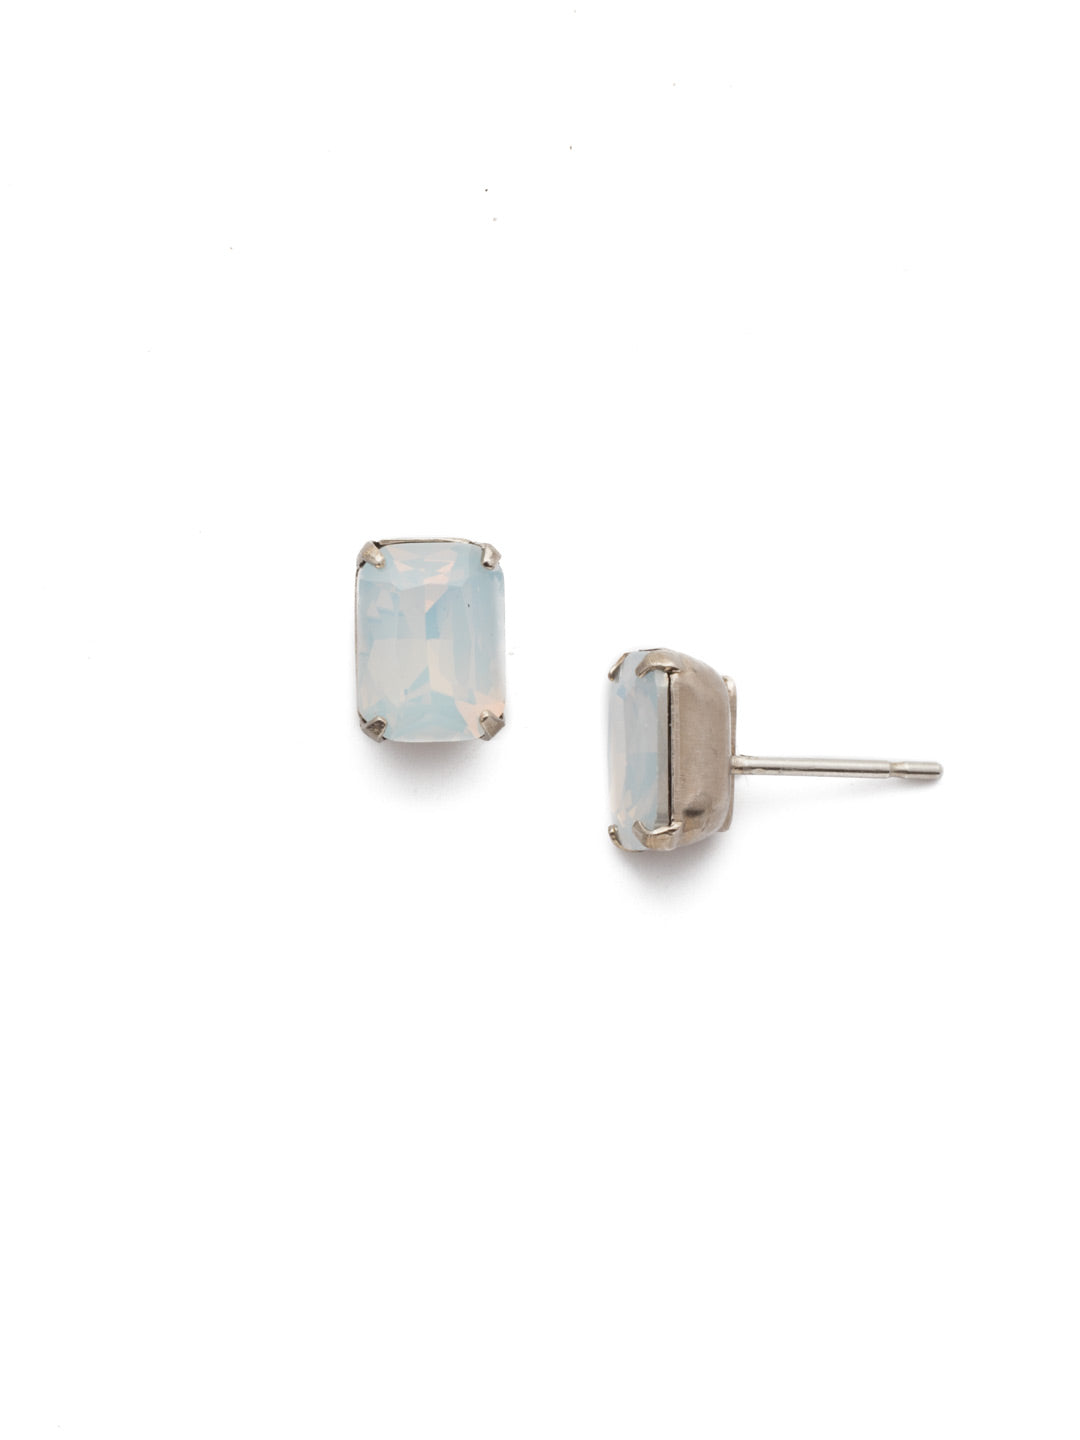 Mini Emerald Cut Stud Earrings - EBY42ASWO - <p>Simply sophisticated. The mini emerald cut stud earrings can be worn alone or paired with anything for an extra accent to any wardrobe. From Sorrelli's White Opal collection in our Antique Silver-tone finish.</p>